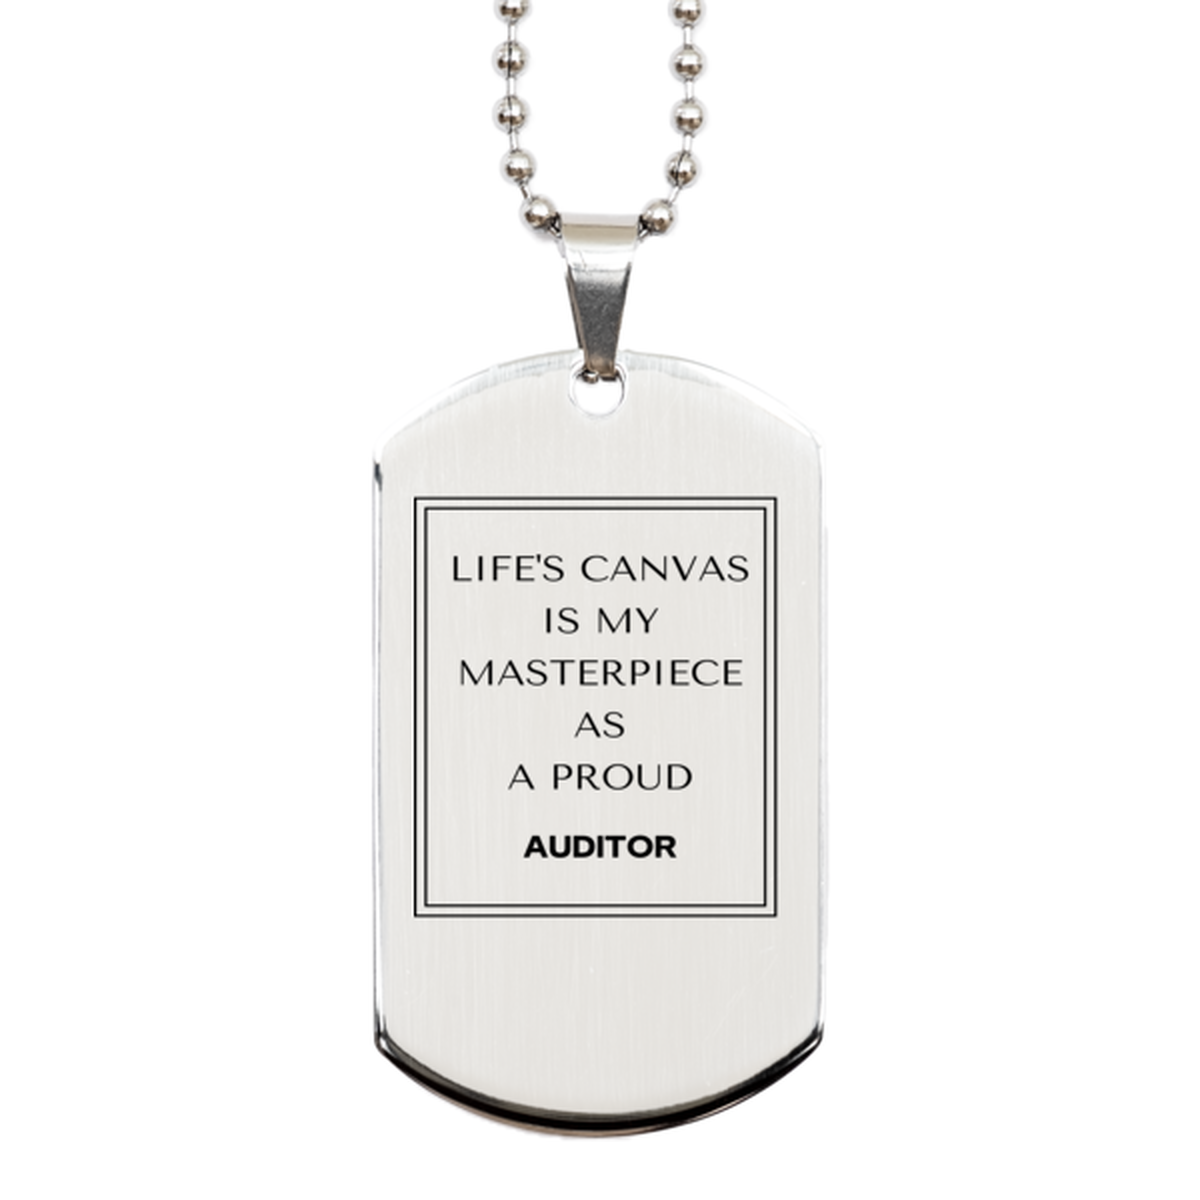 Proud Auditor Gifts, Life's canvas is my masterpiece, Epic Birthday Christmas Unique Silver Dog Tag For Auditor, Coworkers, Men, Women, Friends